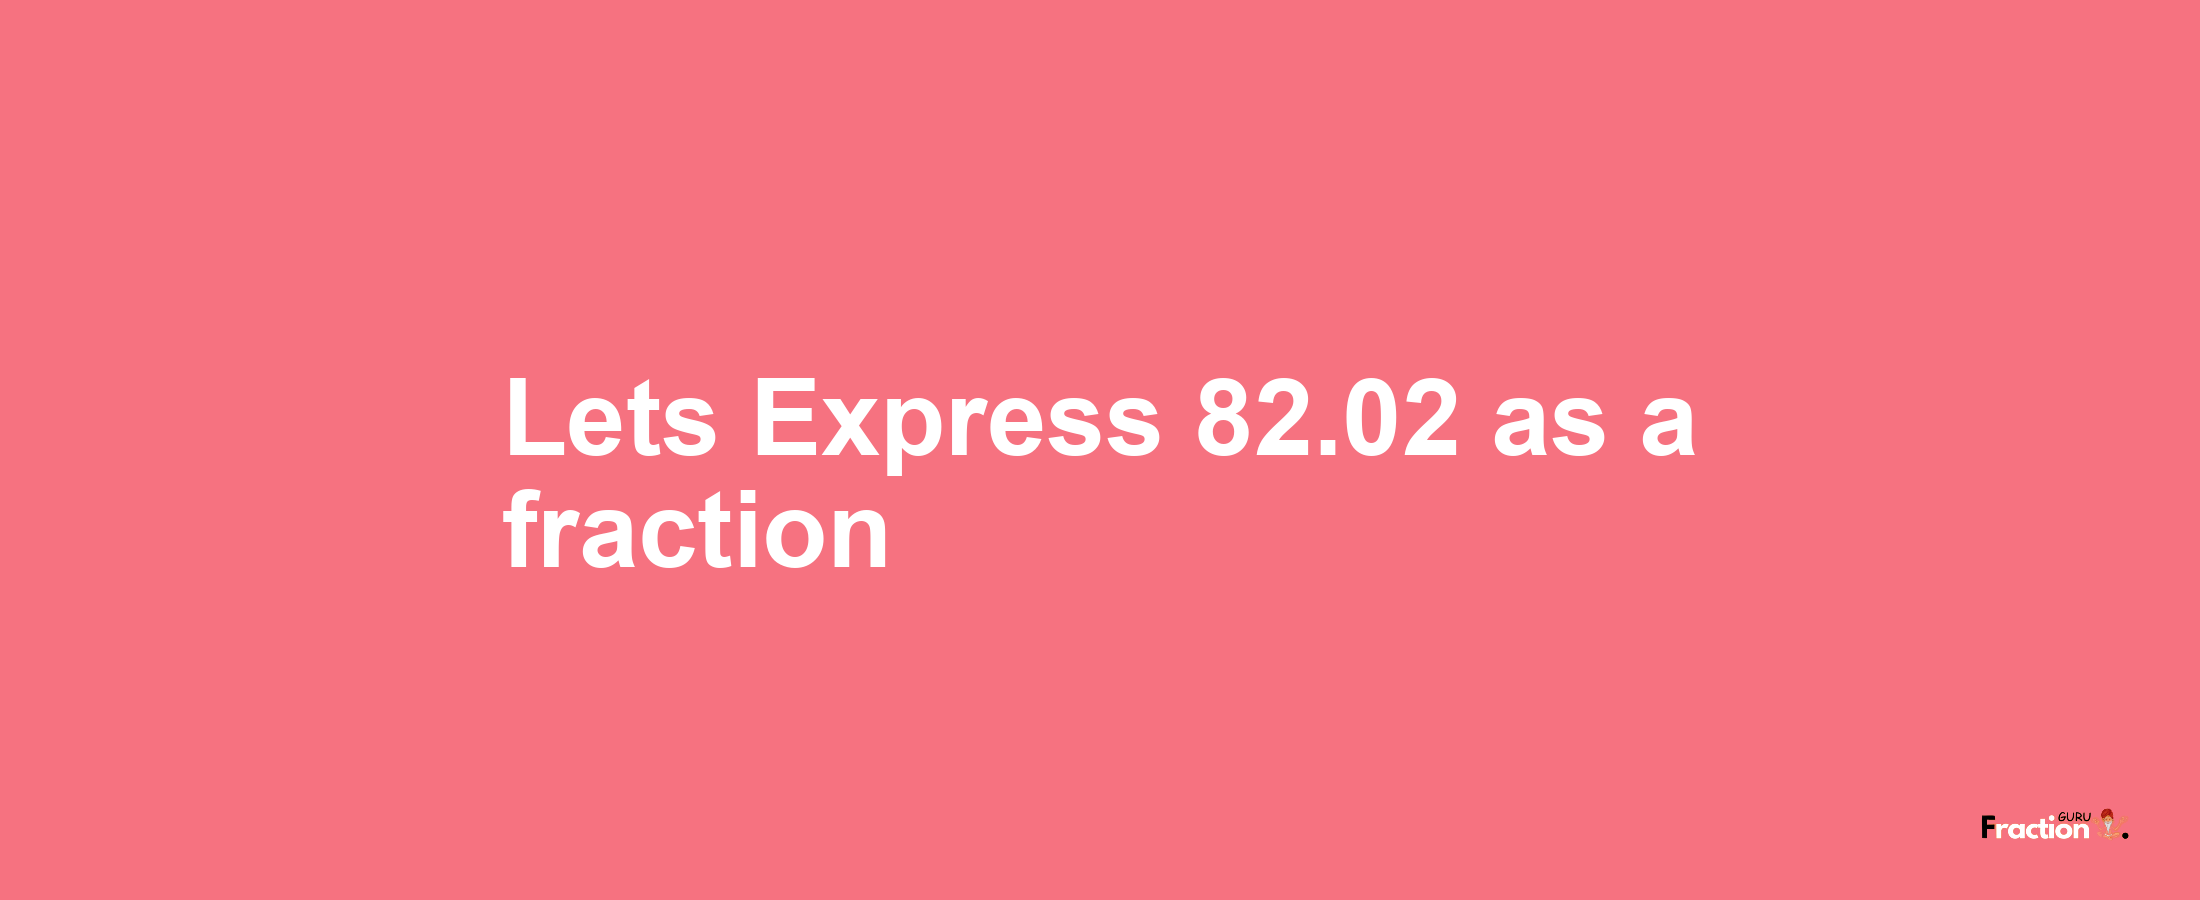 Lets Express 82.02 as afraction